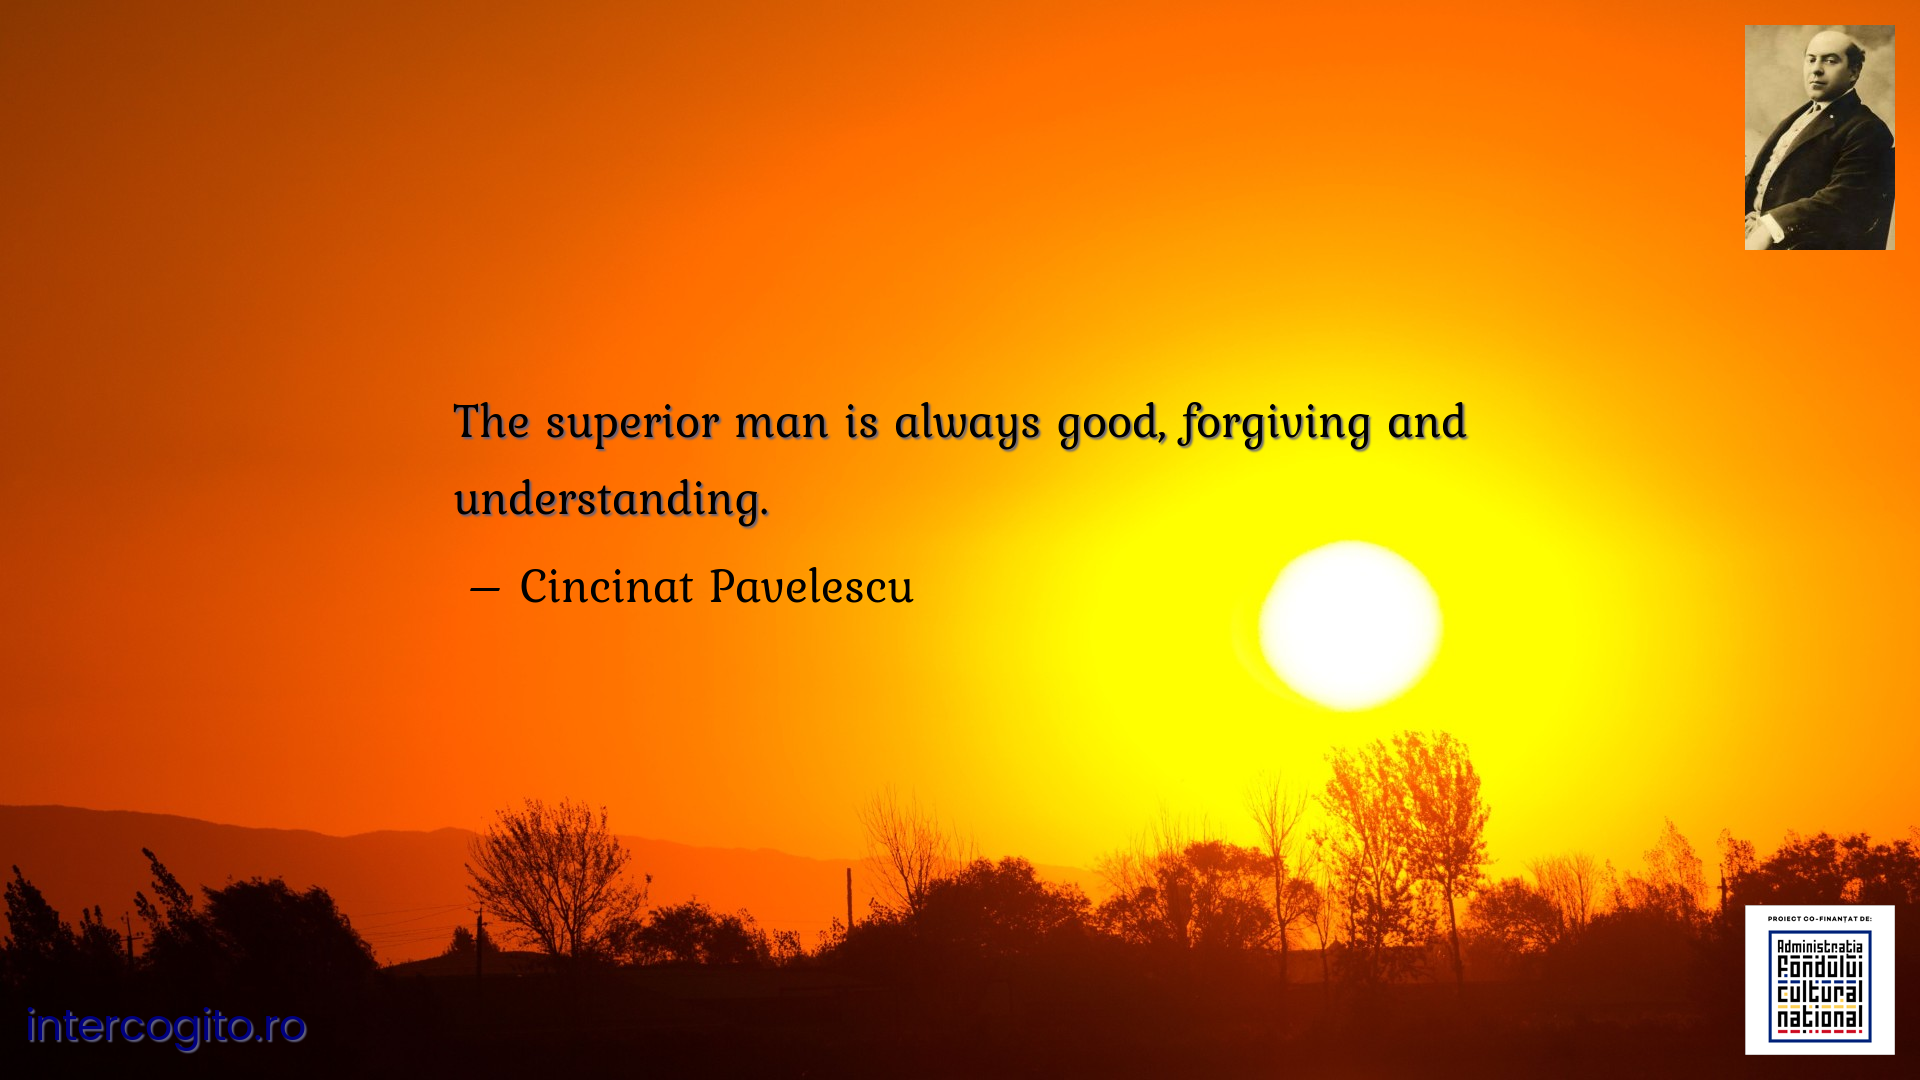 The superior man is always good, forgiving and understanding.